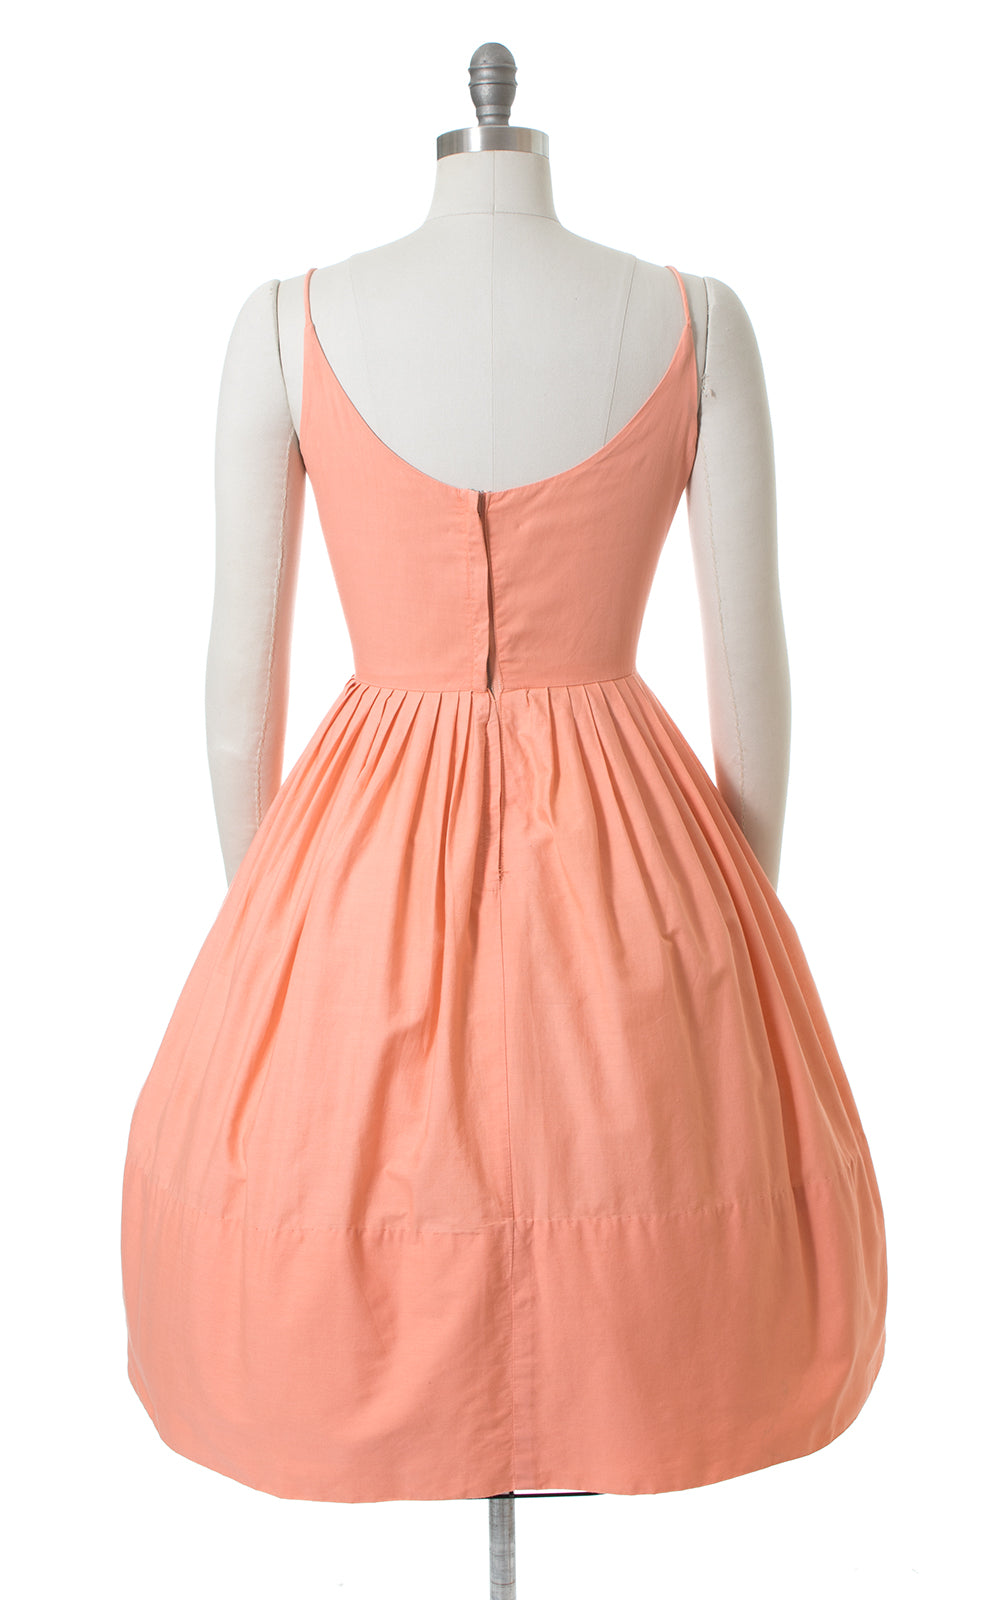 1950s Frederick's of Hollywood Peach Cotton Sundress